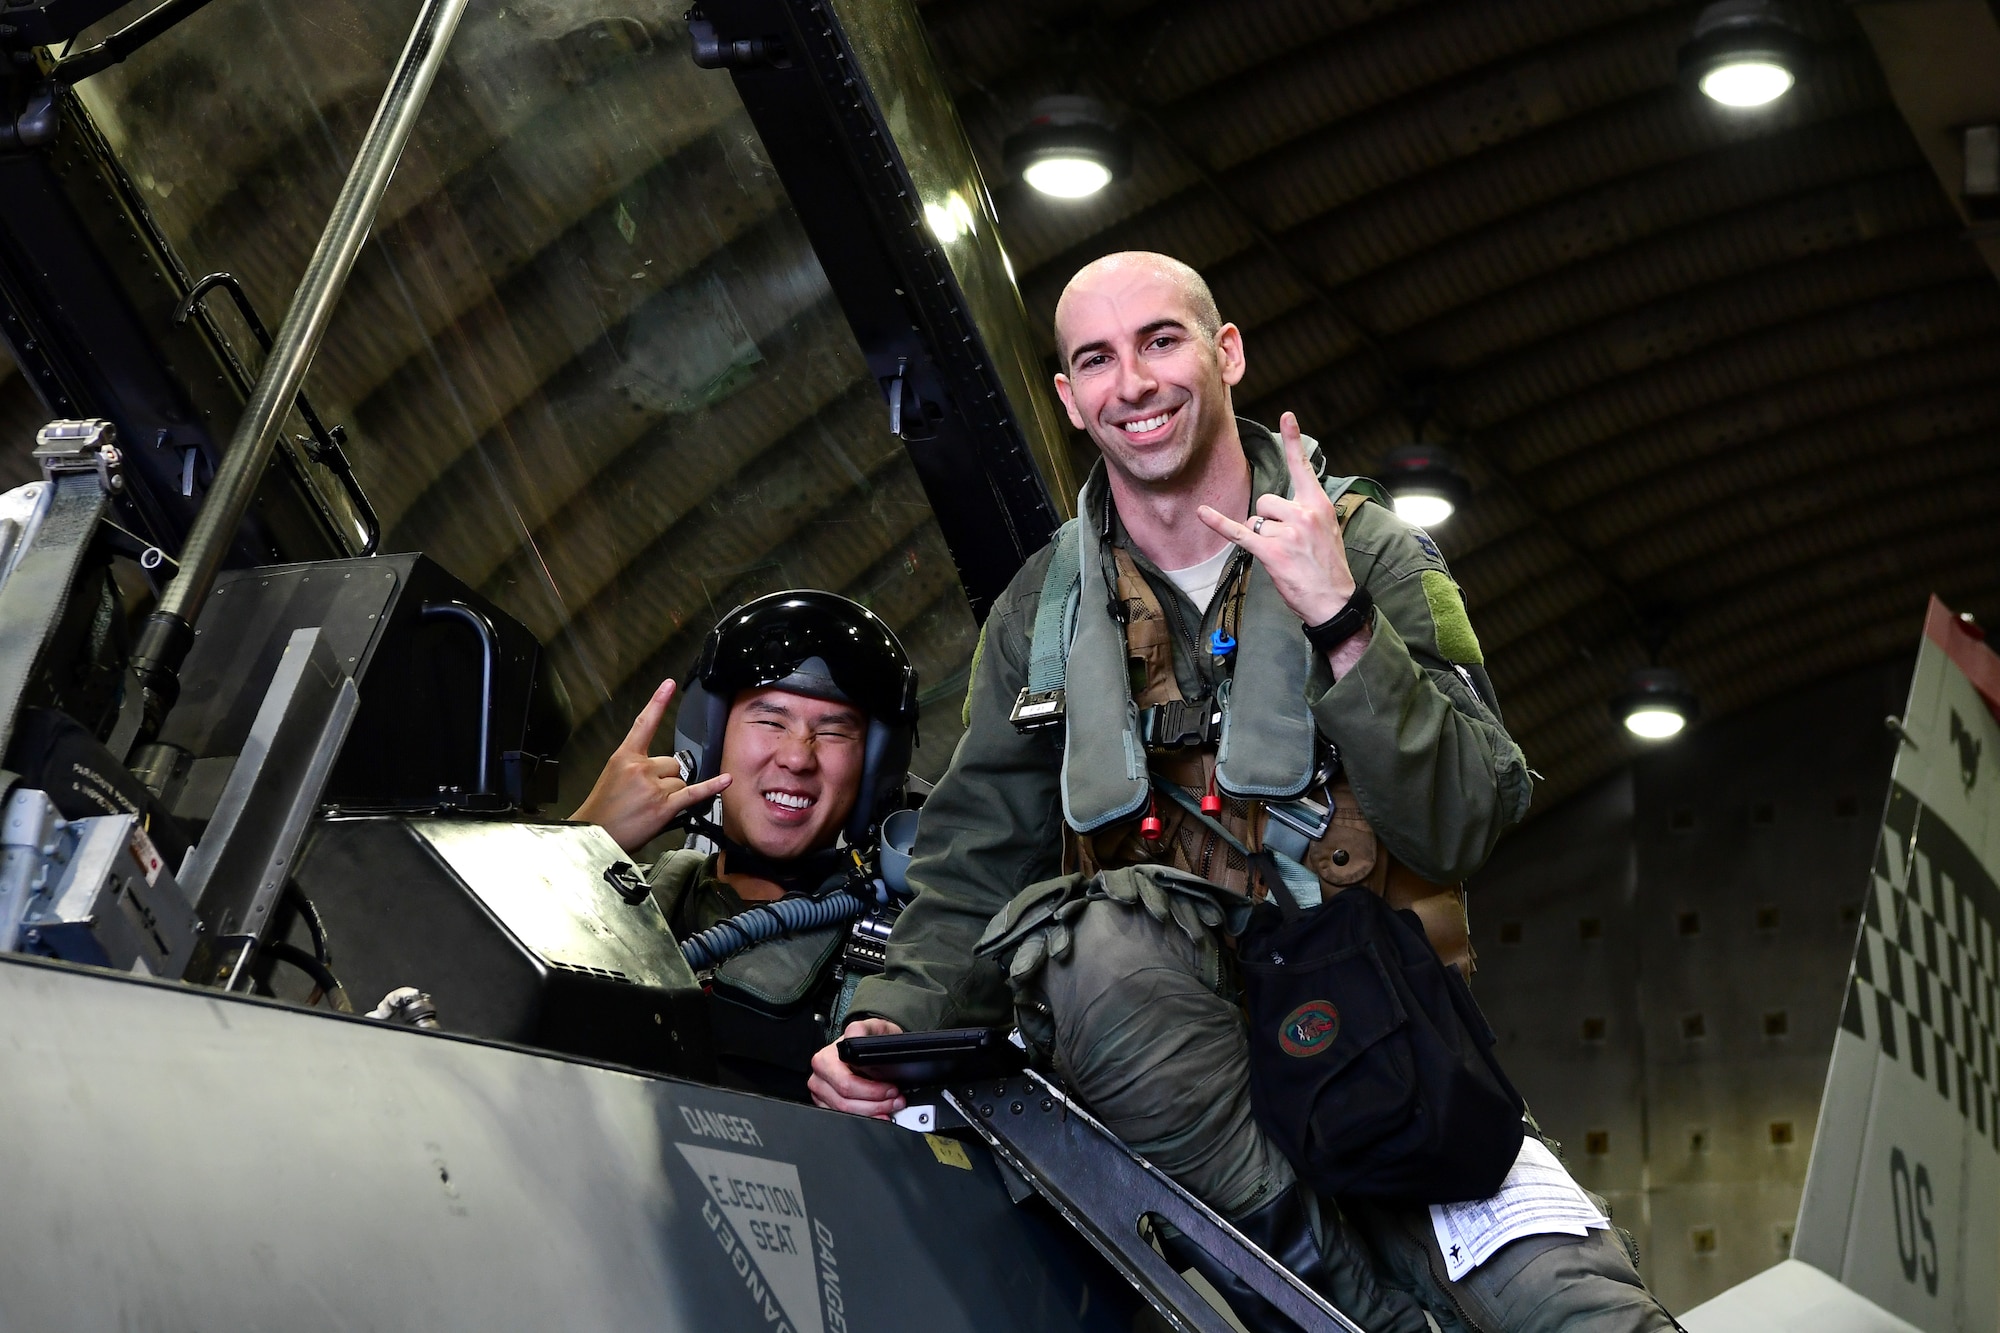 Maj. Chris Ng, 51st Medical Operations Squadron general surgeon, left, and Capt. Louis Bloom, 36th Fighter Squadron F-16 pilot, pose for a photo at Osan Air Base, Republic of Korea, July 28, 2020. Both hailing from Randolph, Massachusetts, the Randolph High School graduates continued their friendship while attending the United States Air Force Academy. Rekindling at Osan Air Base, their familiarization flight plans were initially derailed due to Bloom’s motorcycle accident. Ng’s medical expertise was instrumental to Bloom’s full and speedy recovery during the surgical and rehabilitation process, ultimately resulting in finally flying together. (U.S. Air Force photo by Senior Airman Noah Sudolcan)